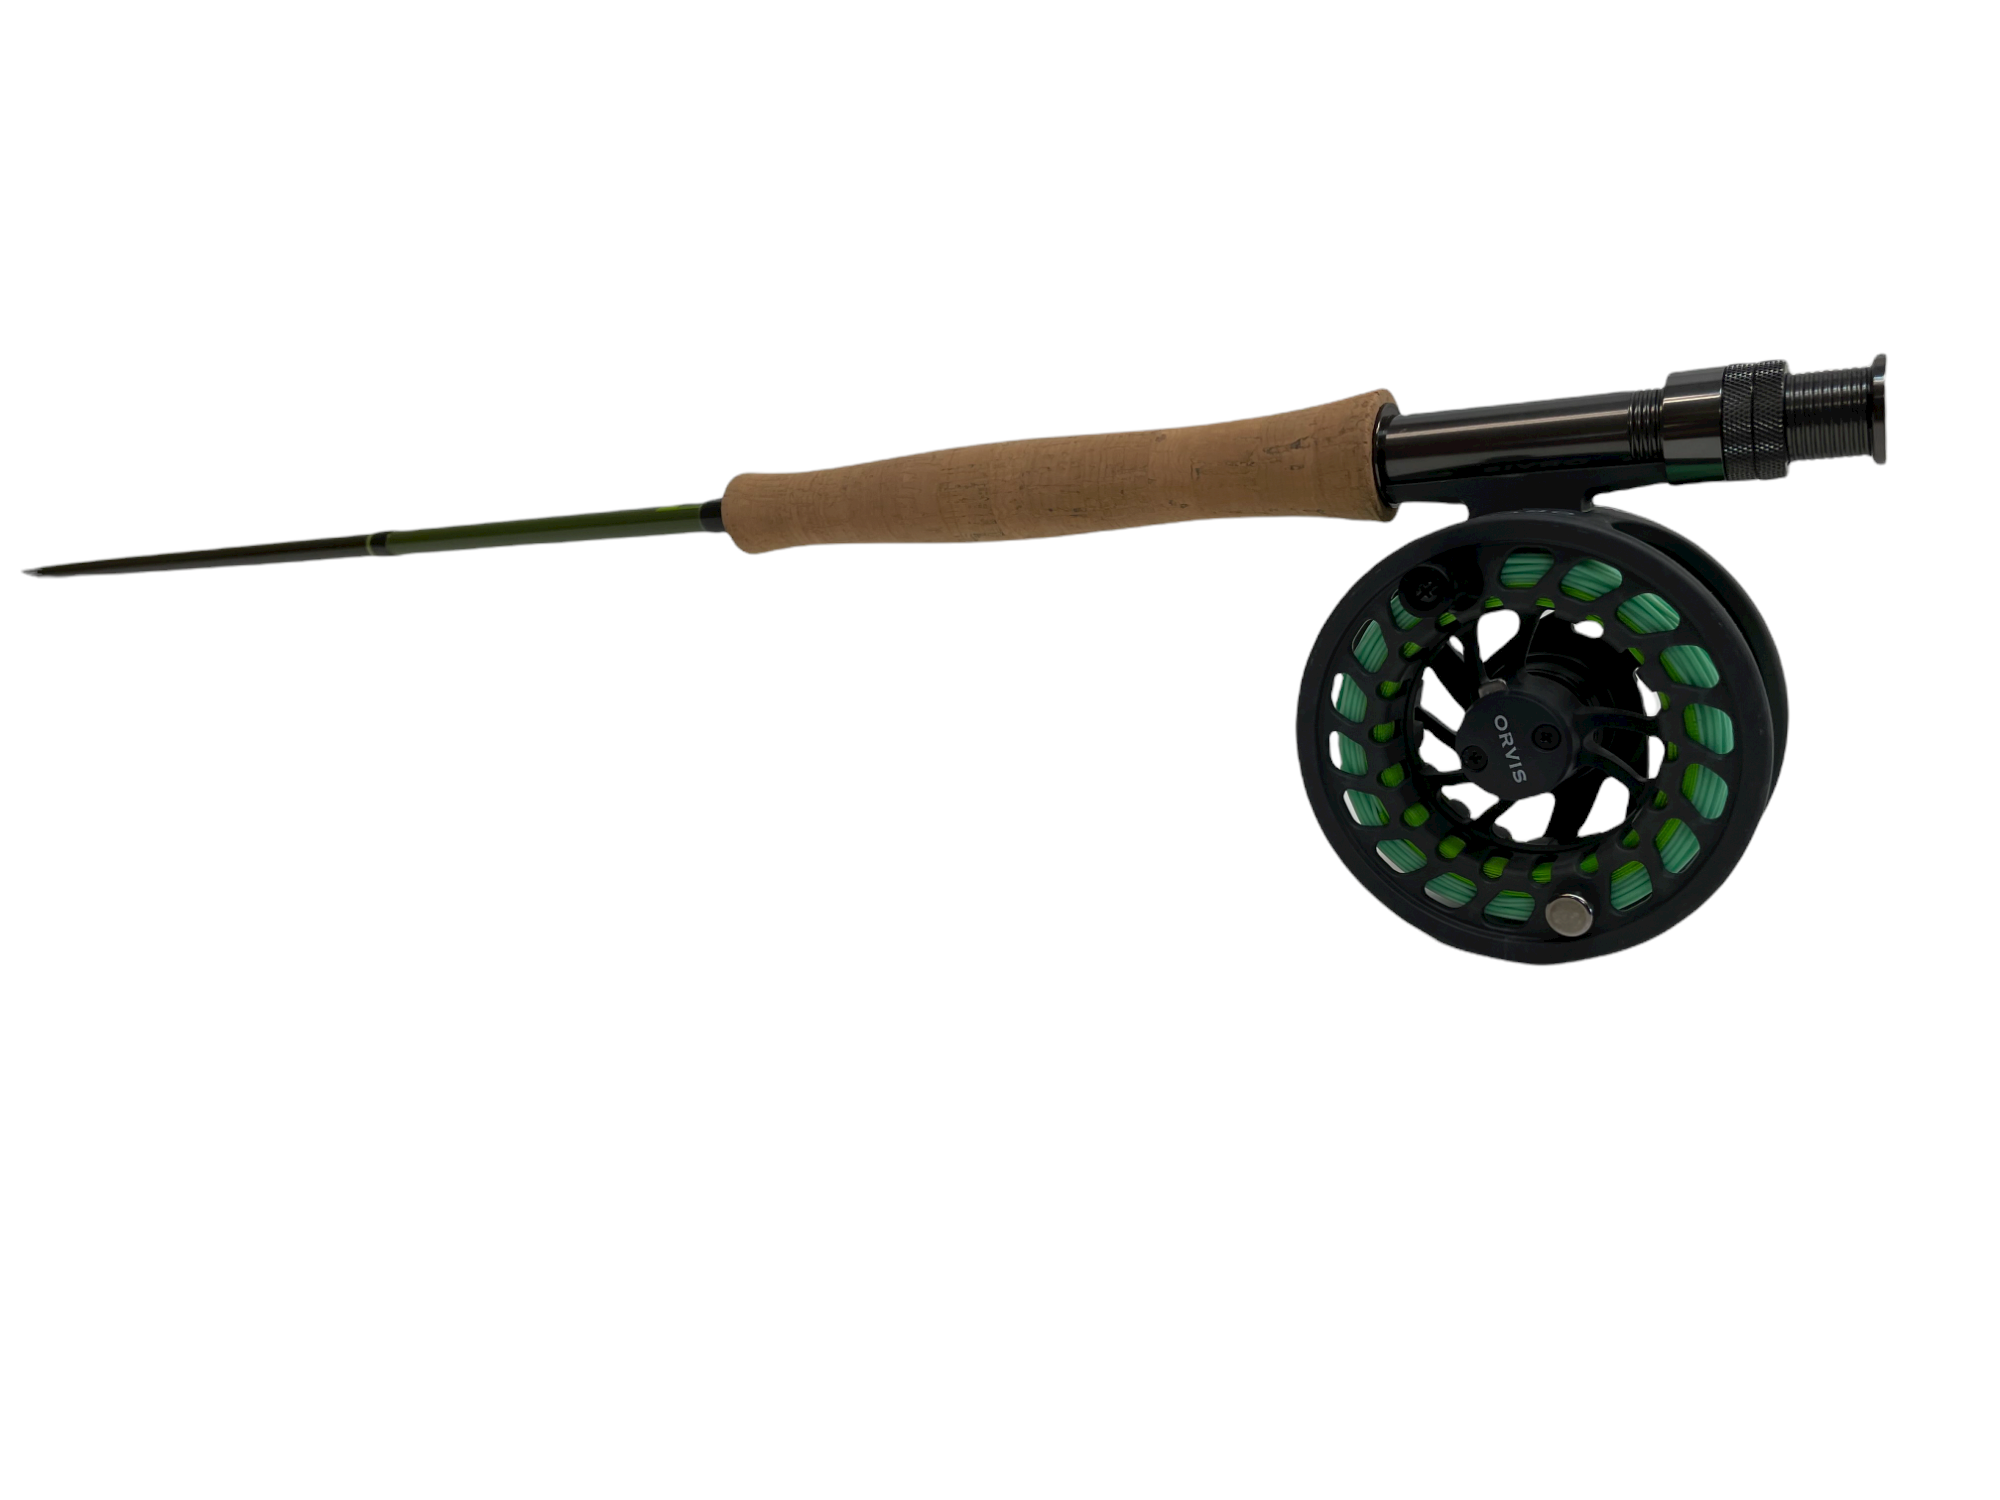 Orvis Encounter Fly Fishing Combo Review – Budget Friendly